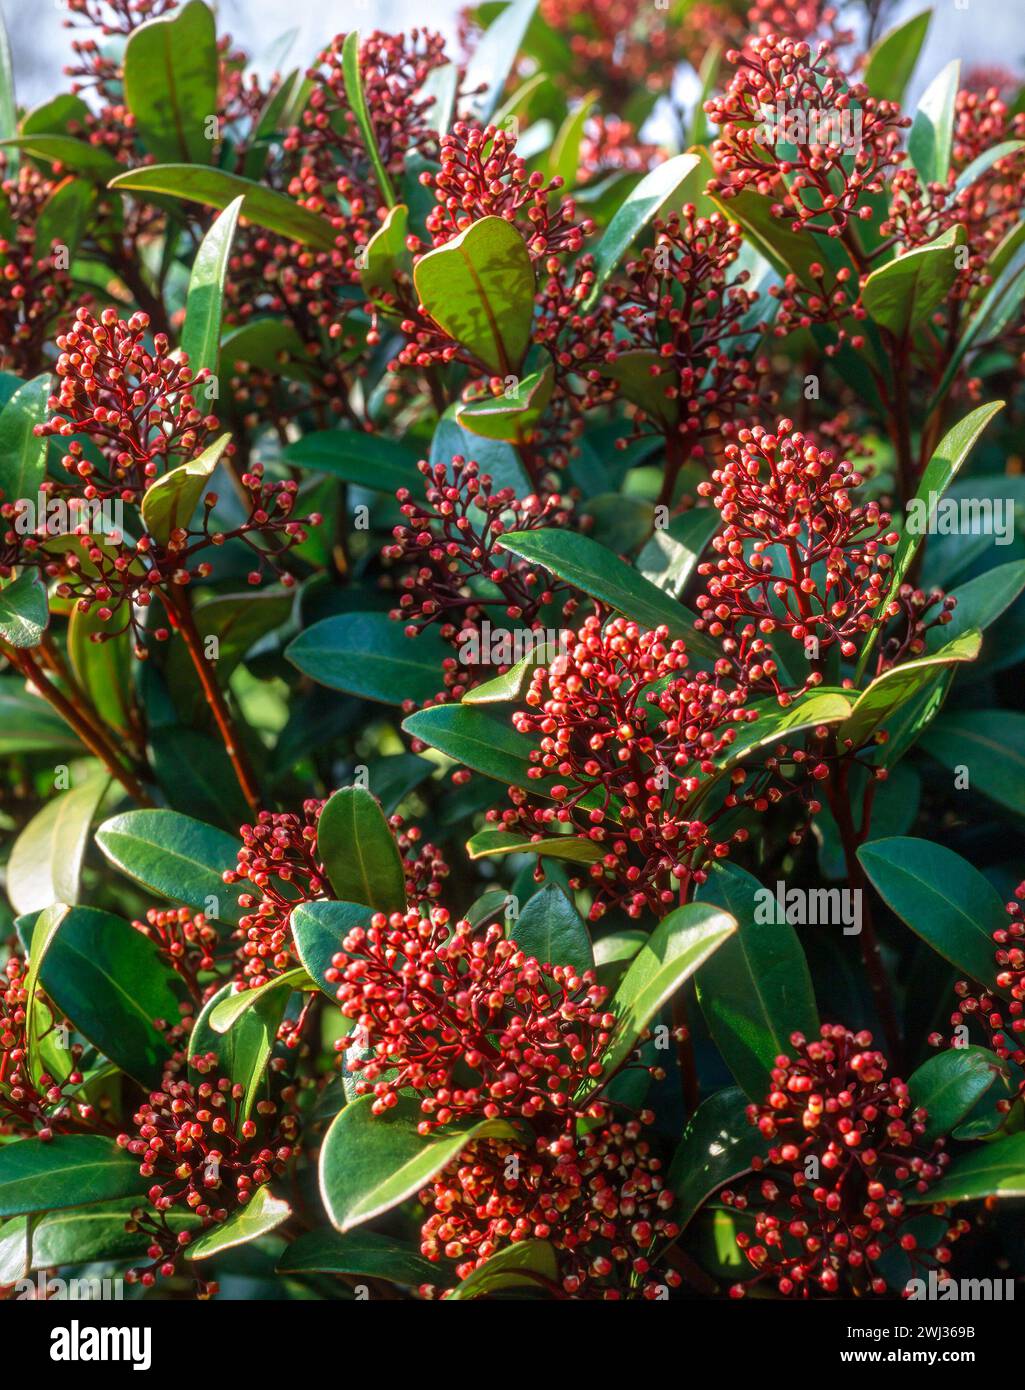 Skimmia japonica 'Rubella' (syn. Skimmia japonica reevesiana 'Rubella' / Skimmia 'Rubella') evergreen shrub with rich red flower buds, England, UK Stock Photo